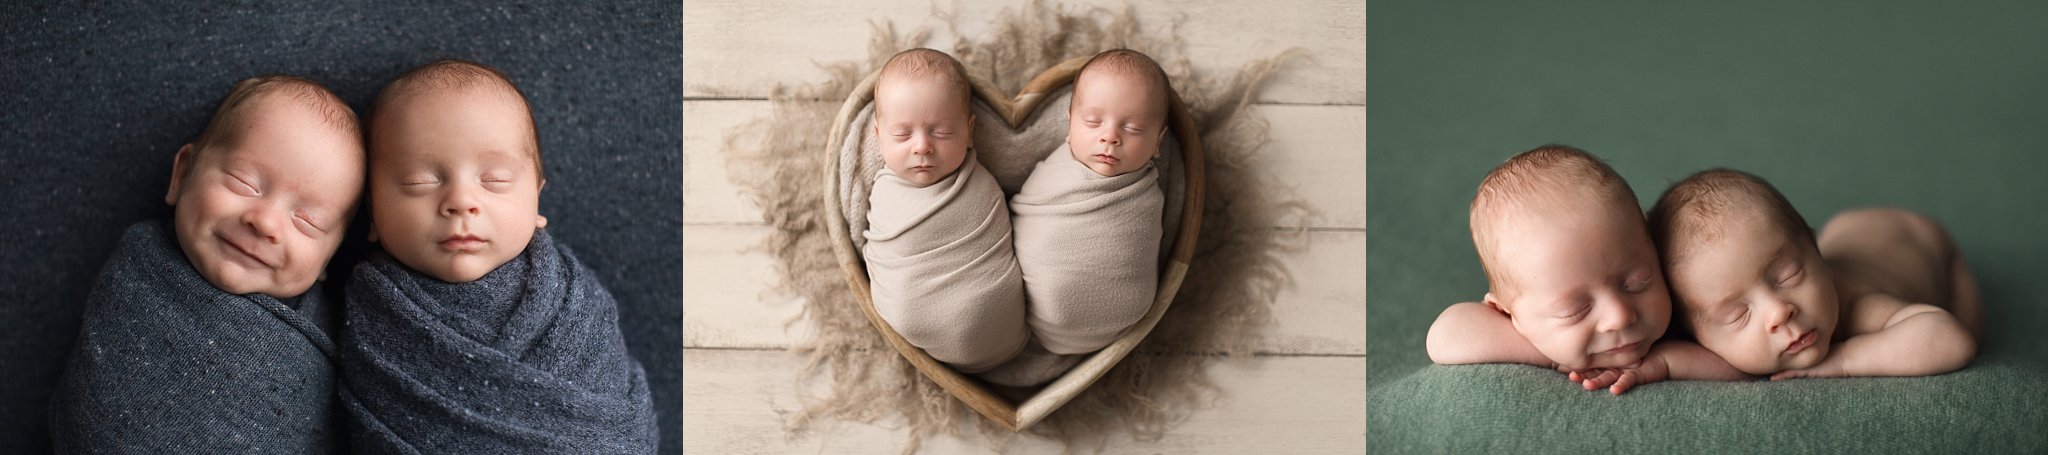 Sweet Baby Photos twin baby boys swaddled sleeping in heart shaped bow